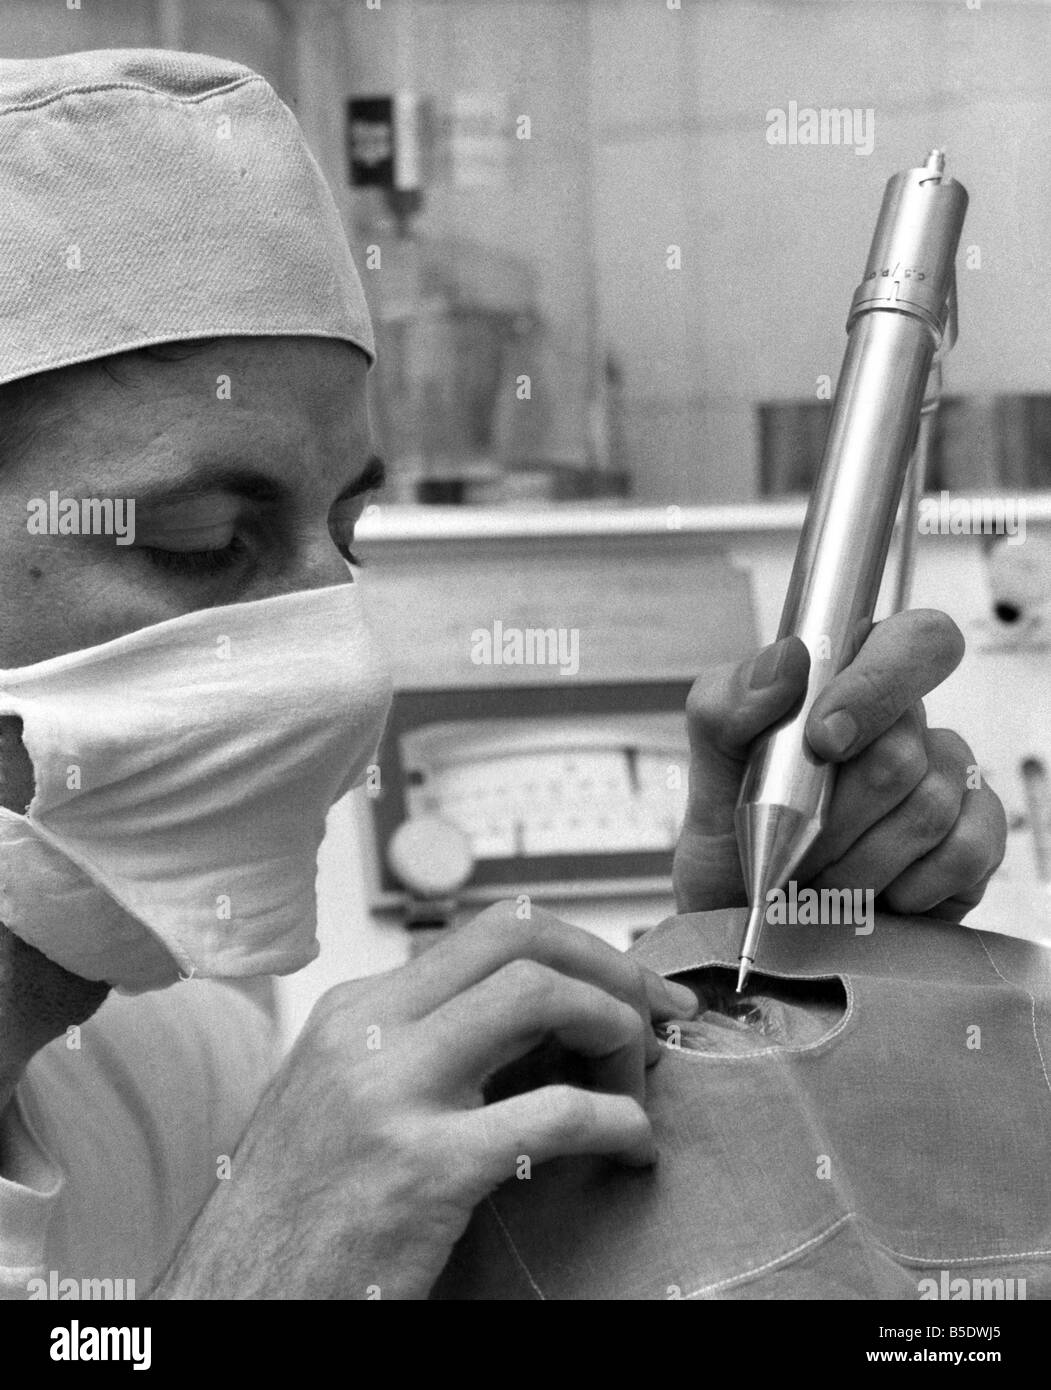 The new Cryo Surgical Unit at Moorfields hospital being demonstrated as it will be used. November 1965 P008332 Stock Photo